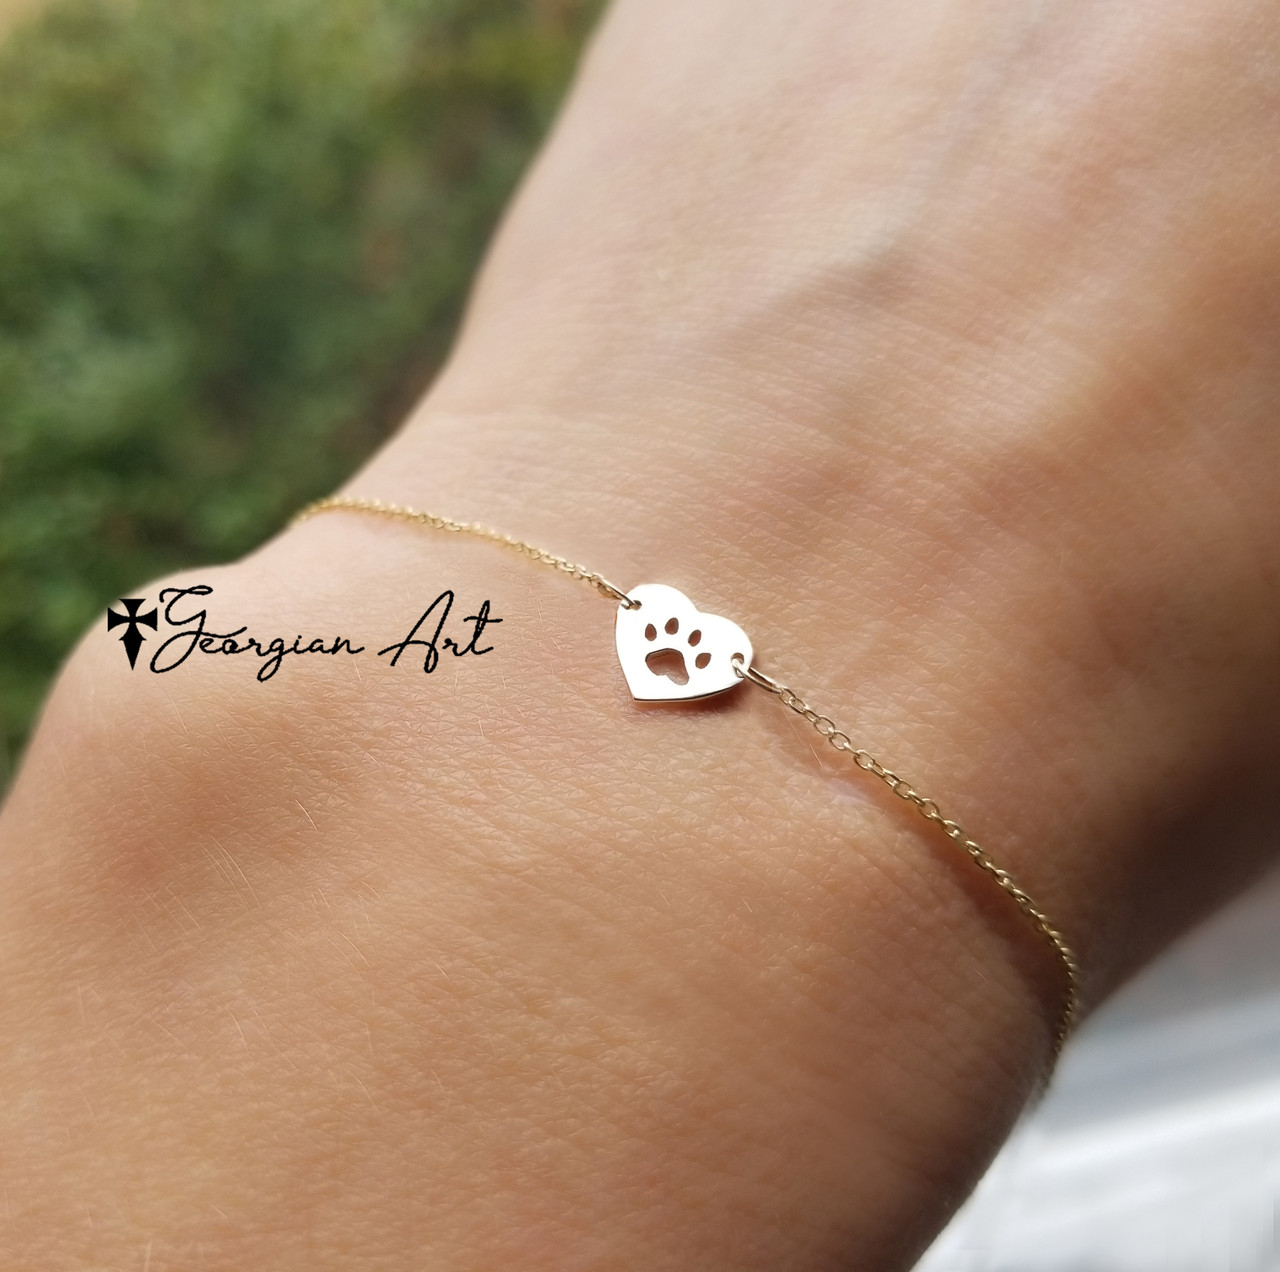 JIANGYUE Dainty Layered Dog Paw Print and Bones Anklet with Initial Anklets Bracelets 14K Gold Plated Adjustable Cute Pet Paw Foot Chain Beach Anklets for Women Teen Girls Jewelry Birthday Gifts